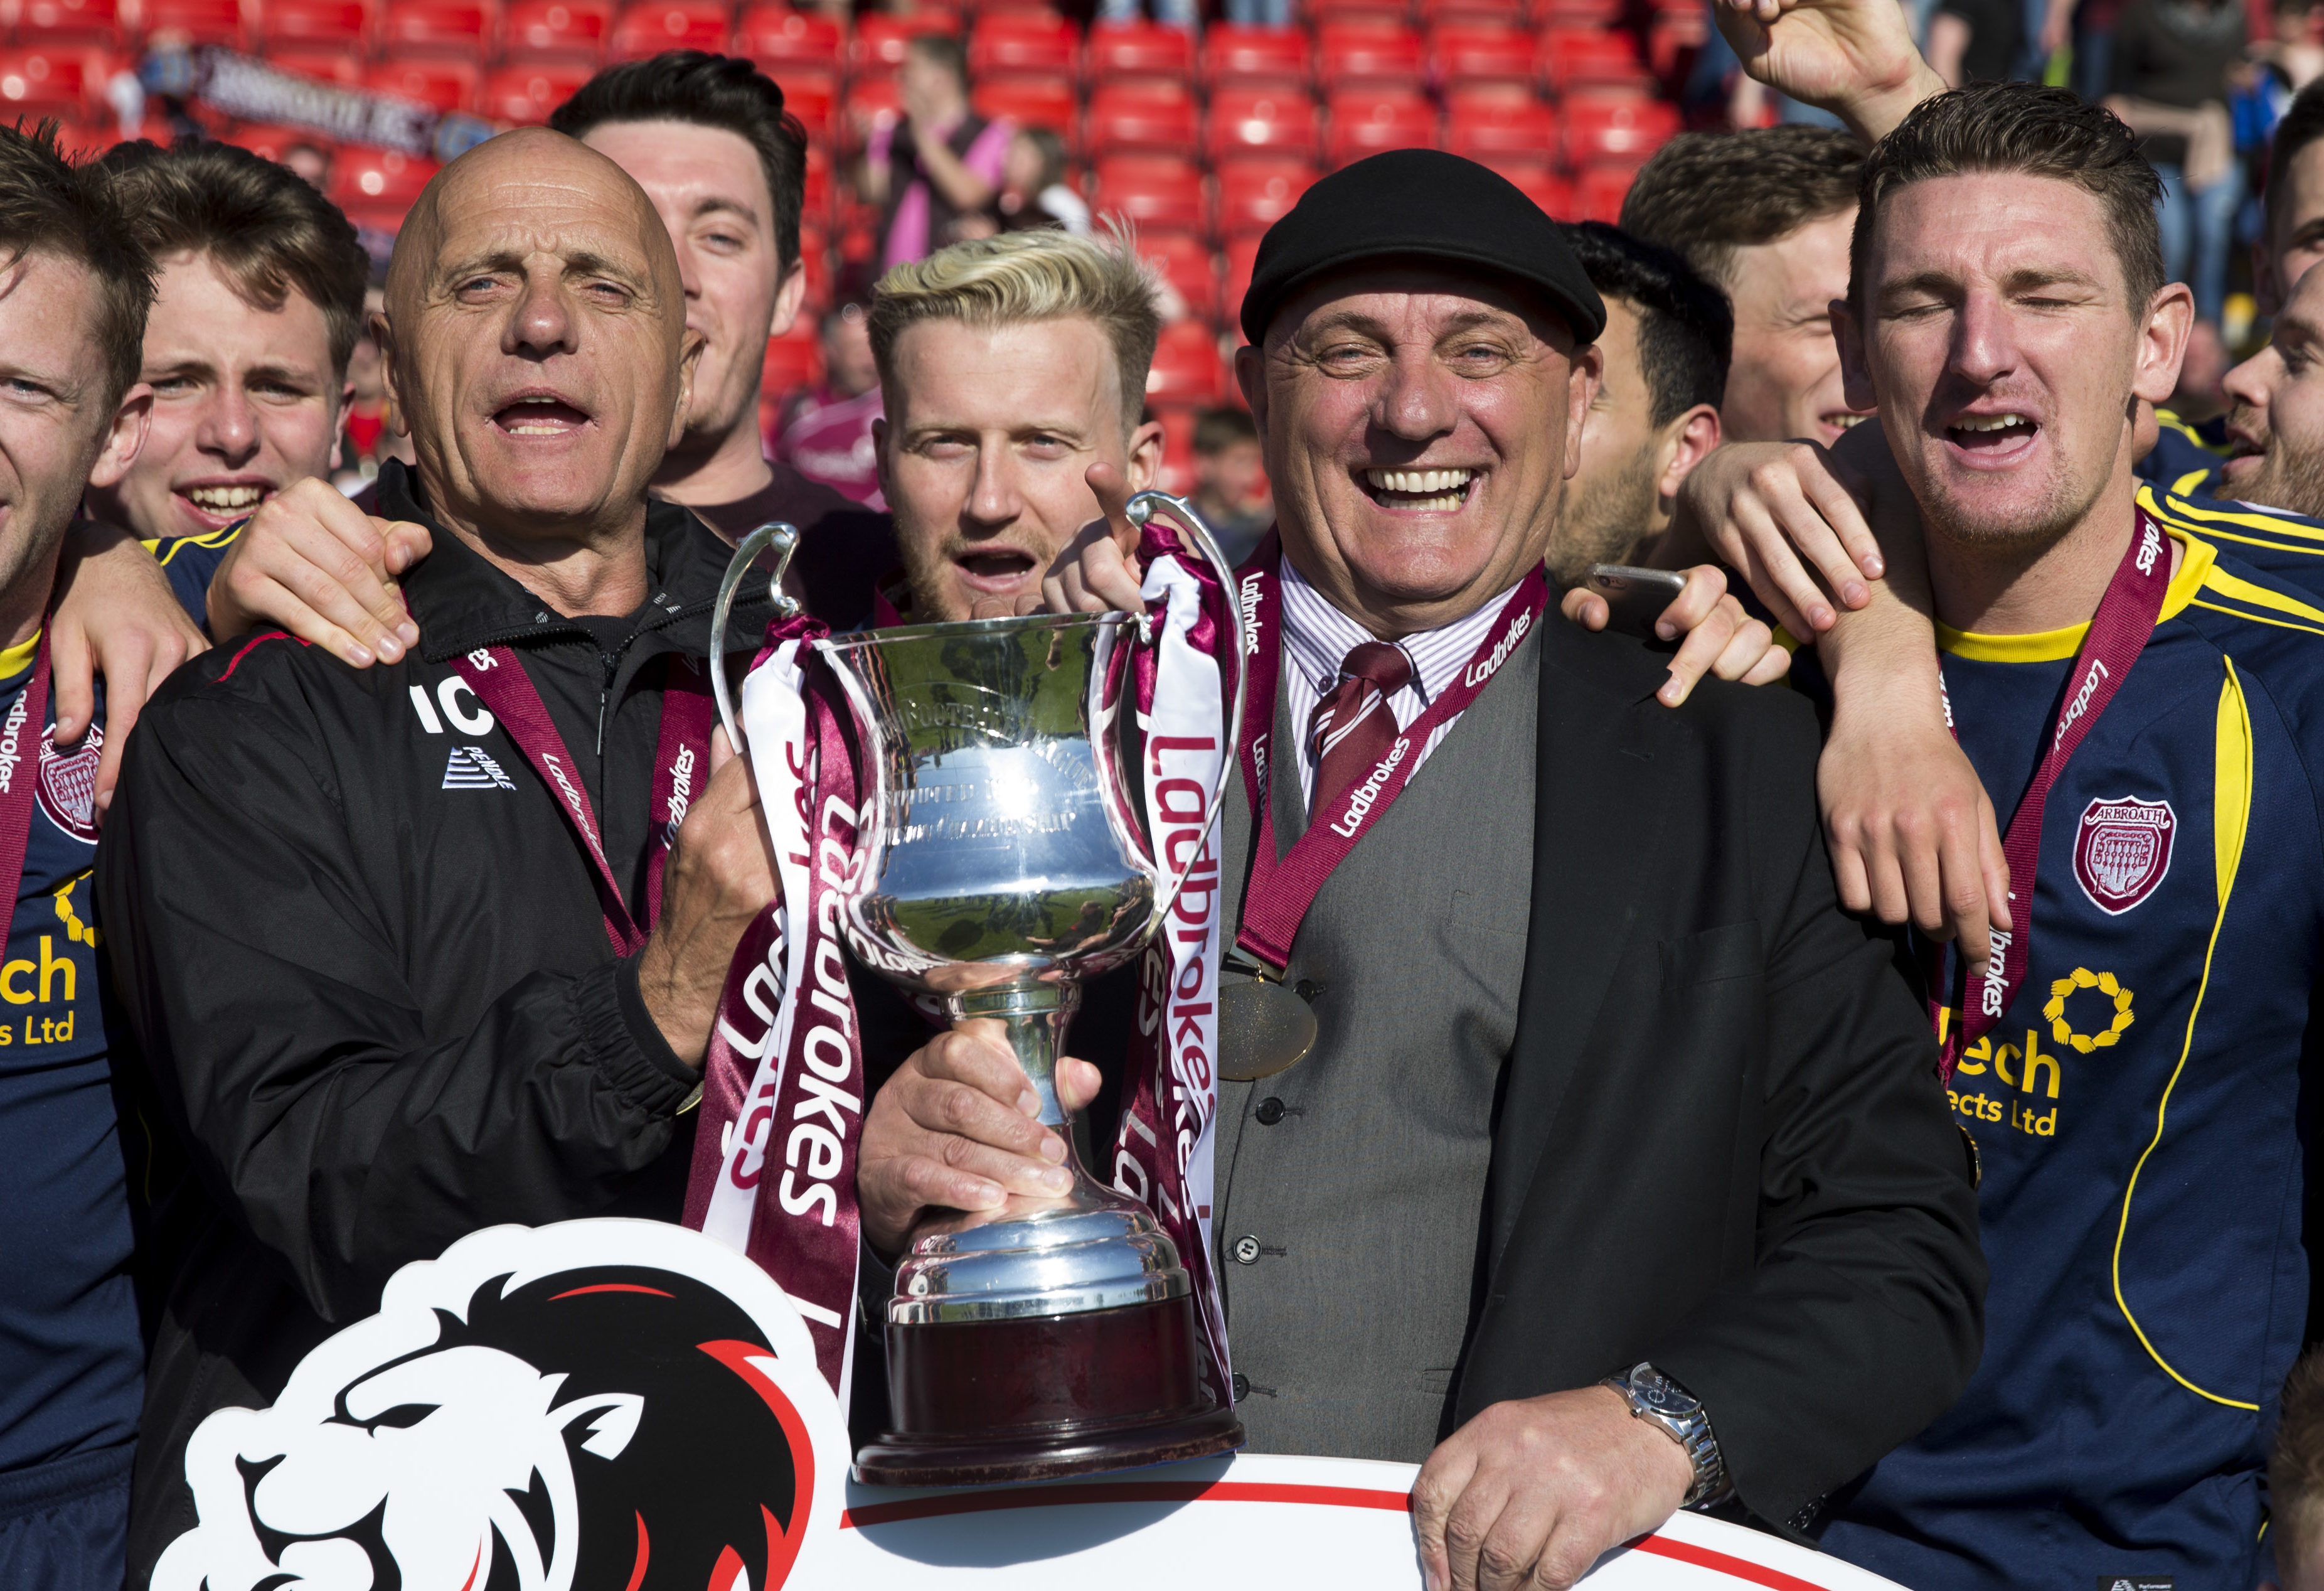 Arbroath won the League 2 title in 2017. Now Dick Campbell is looking to go one better today.